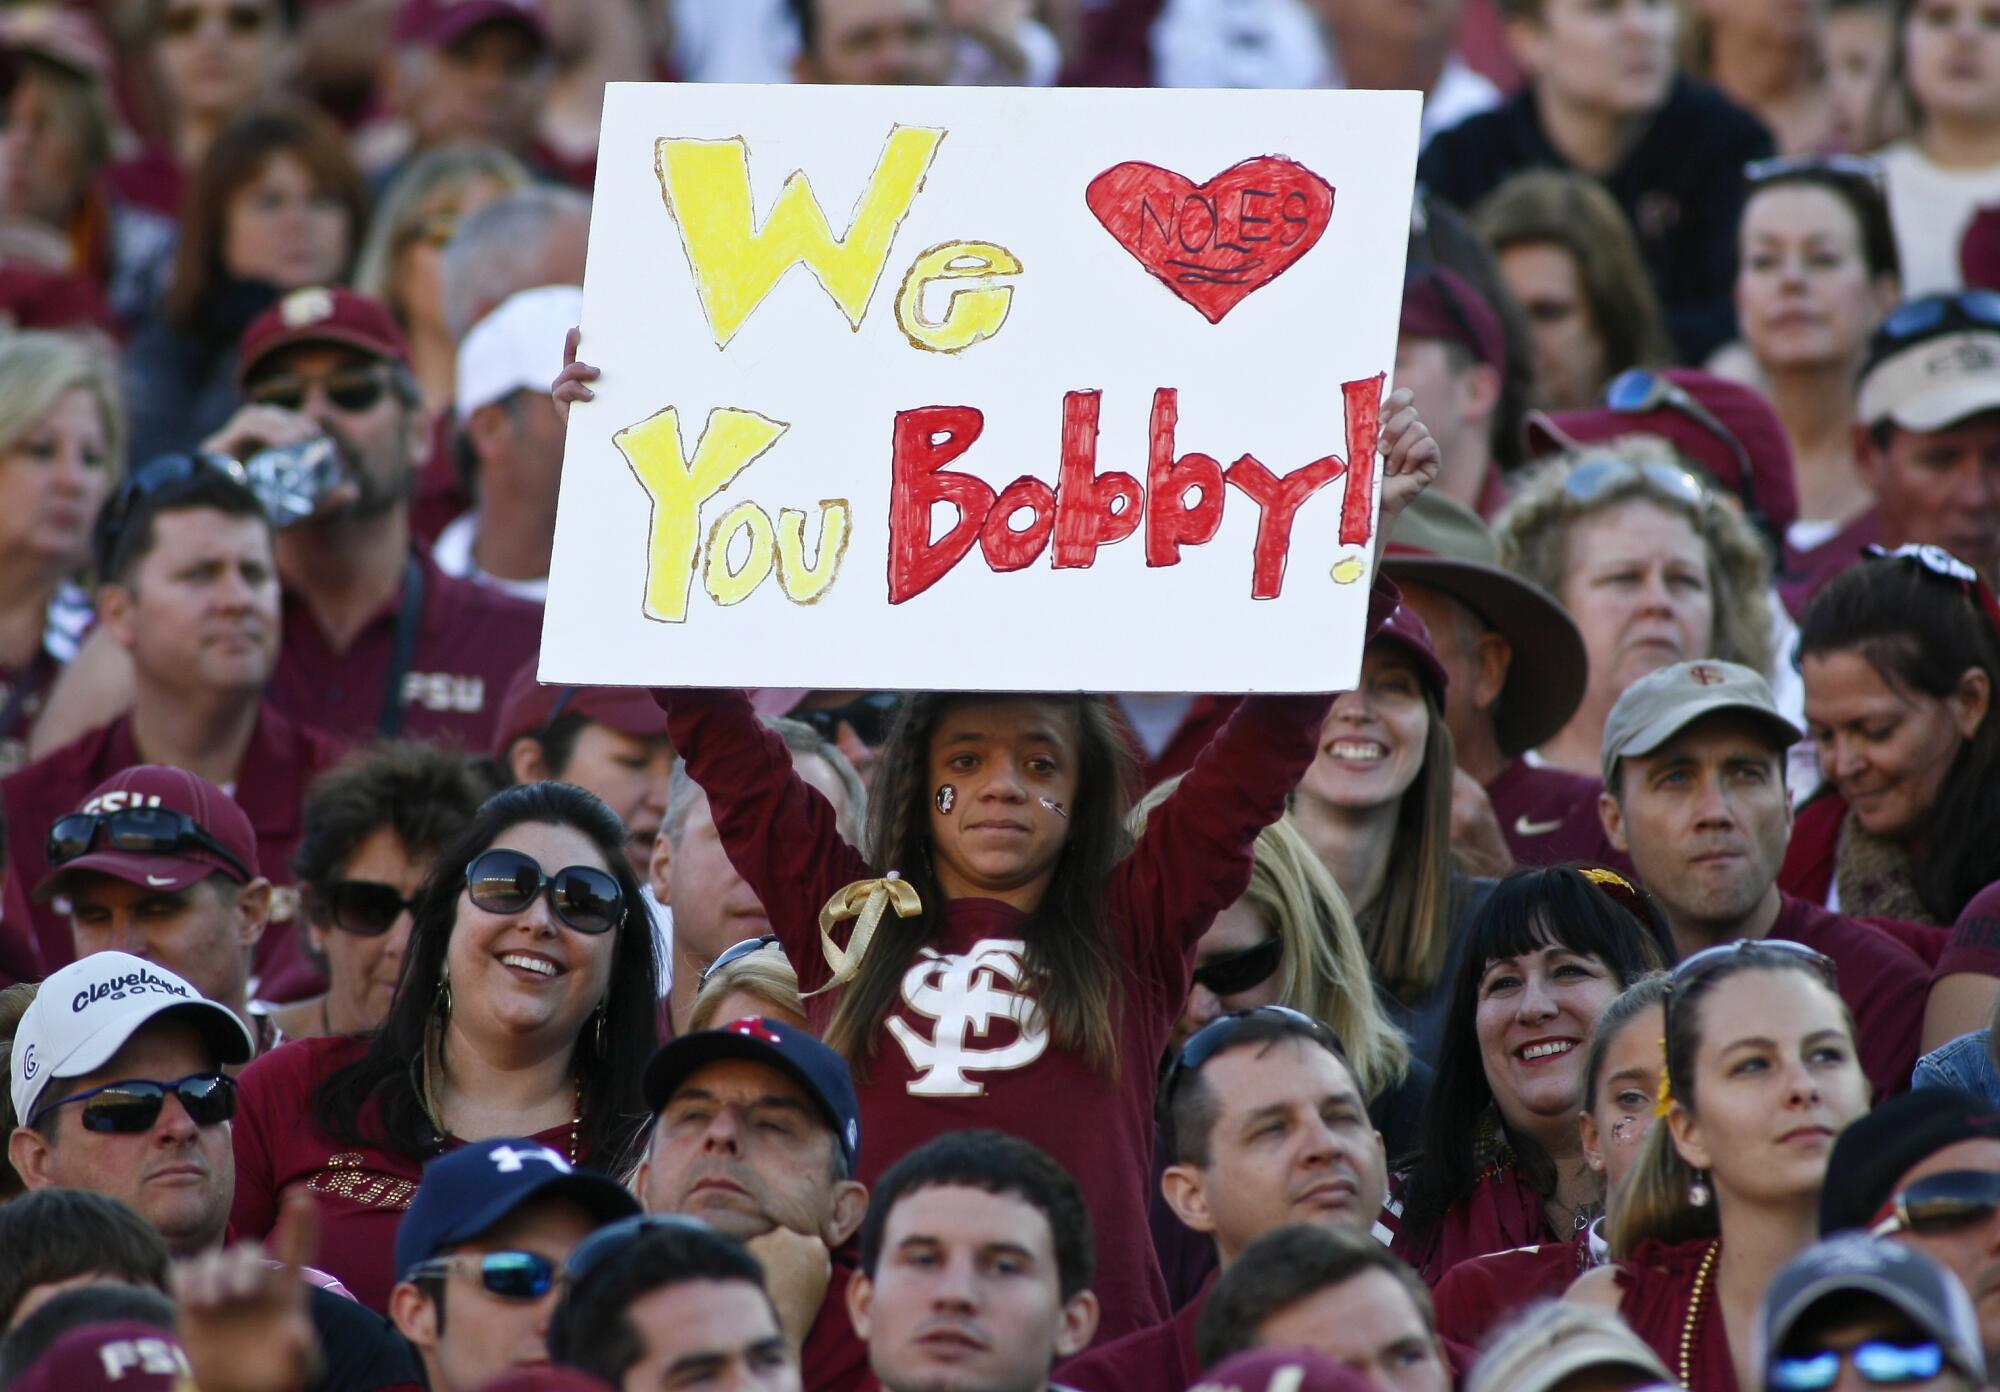 In a crowd in the bleachers, a woman stands, holding a handwritten sign that says "We [heart] you Bobby."